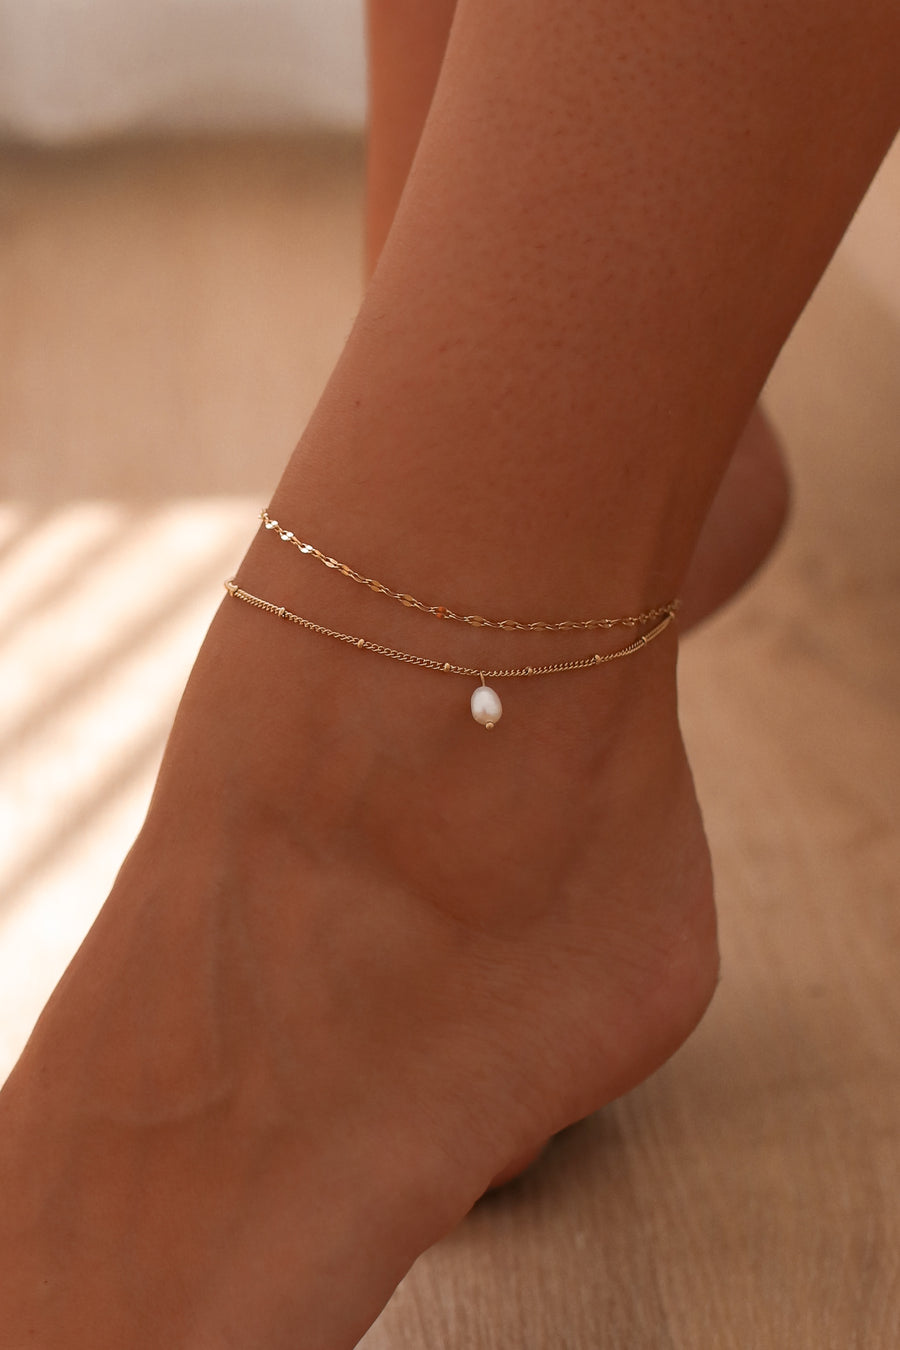 Marlie - 18ct Gold or Silver Stainless Steel Anklet